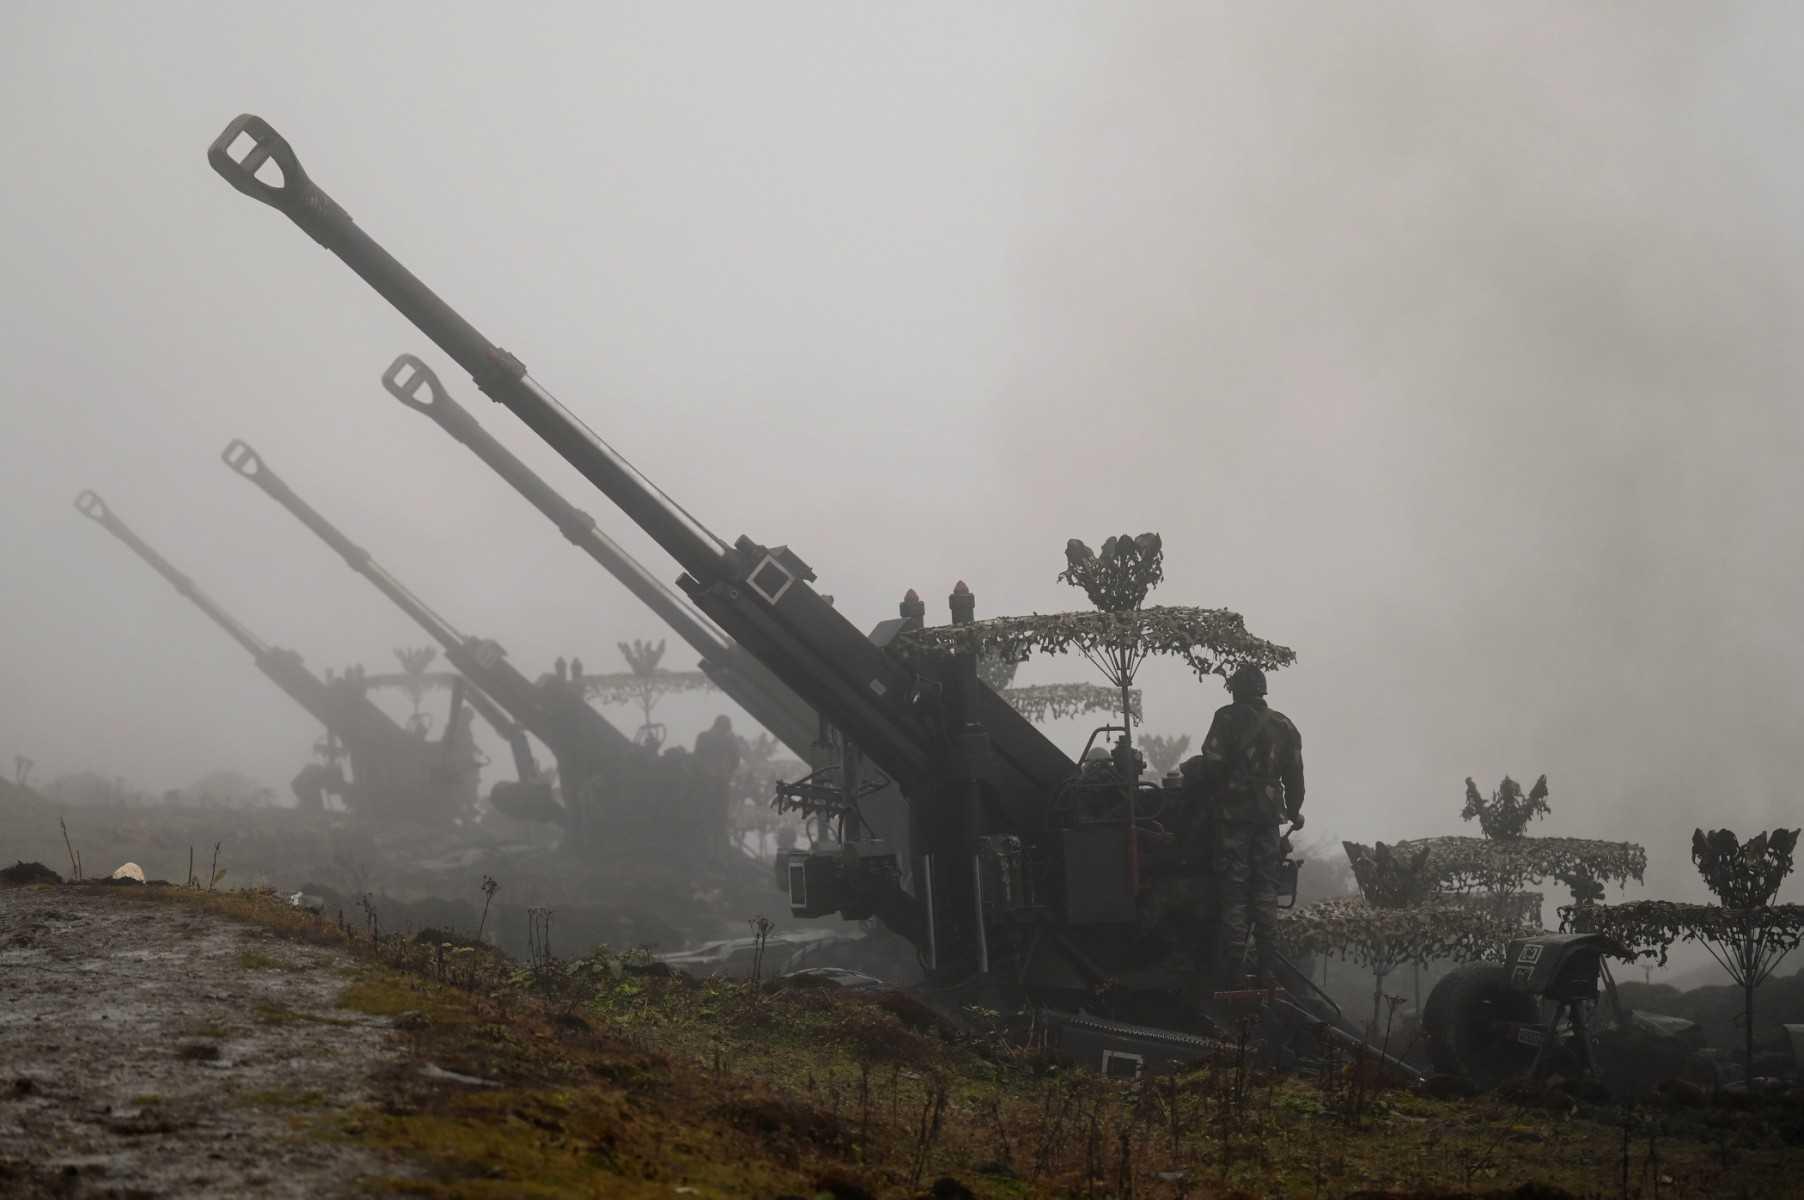 Indian Army soldiers stand next to Bofors guns positioned at Penga Teng Tso ahead of Tawang, near the Line of Actual Control, neighbouring China, in India's Arunachal Pradesh state on Oct 20, 2021. Photo: AFP 